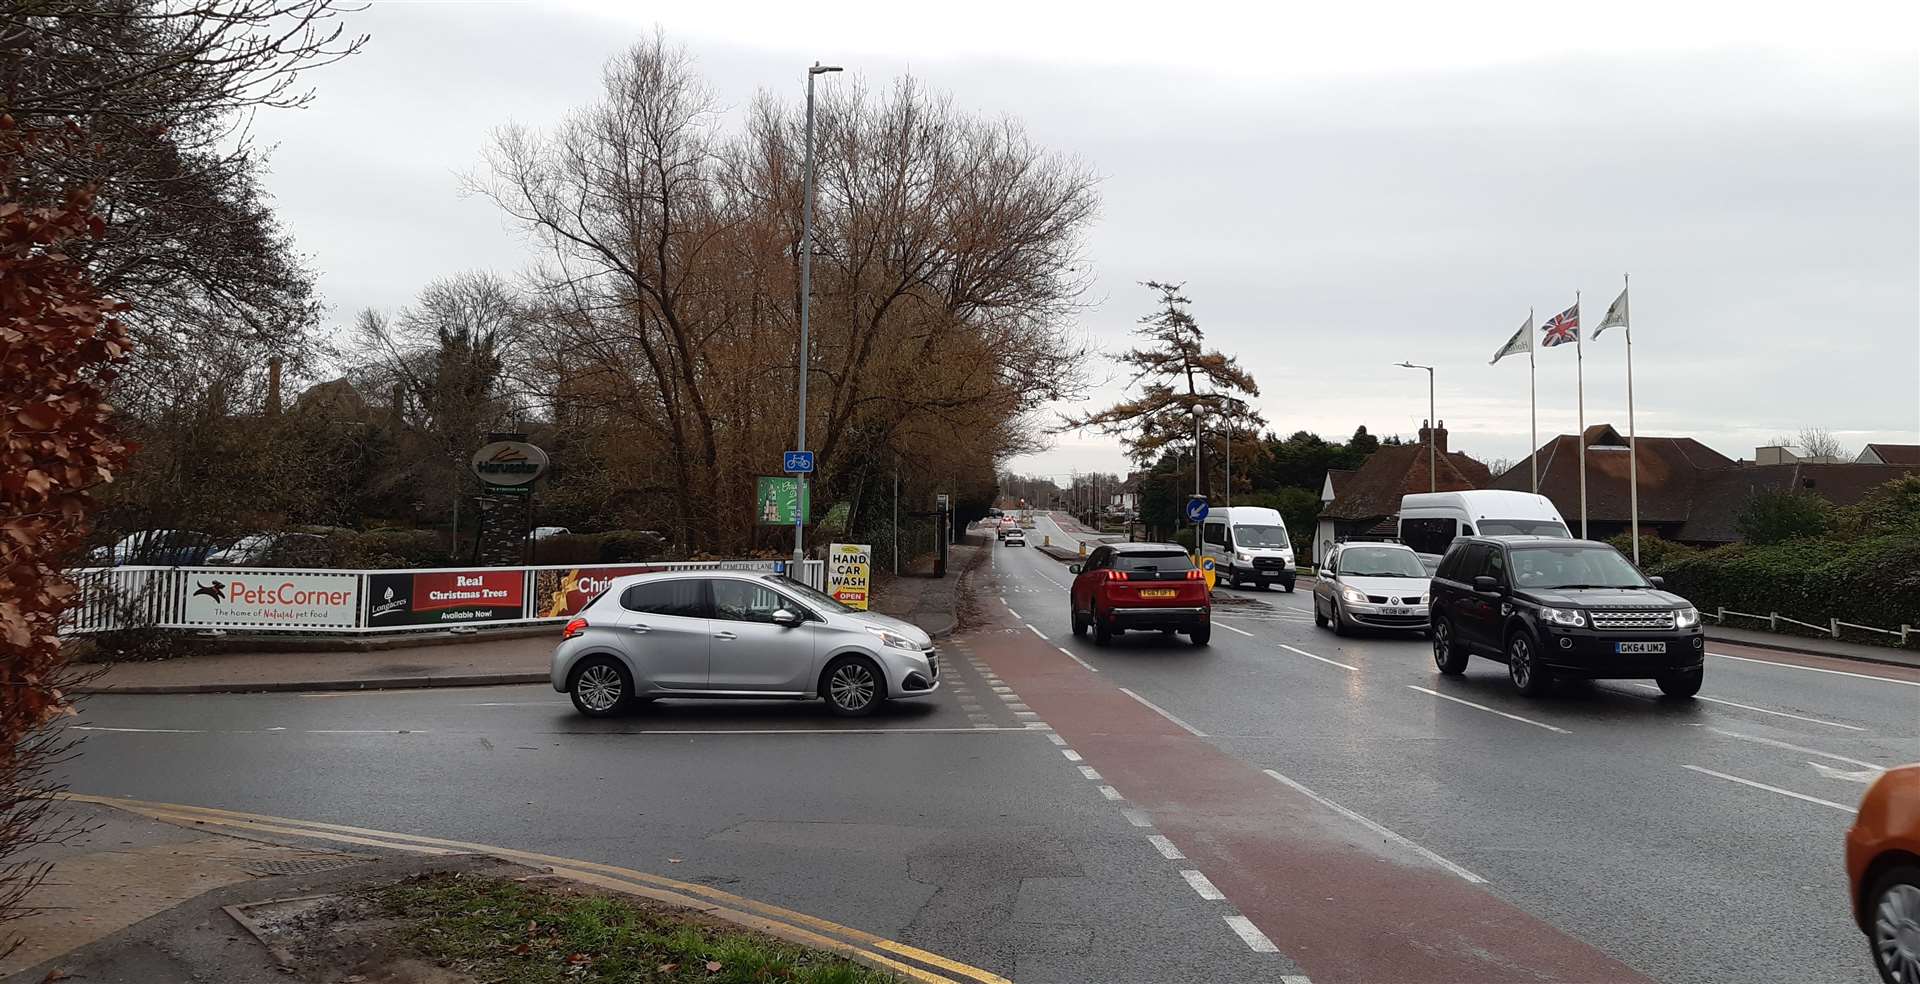 The Cemetery Lane junction could have traffic lights under the scheme